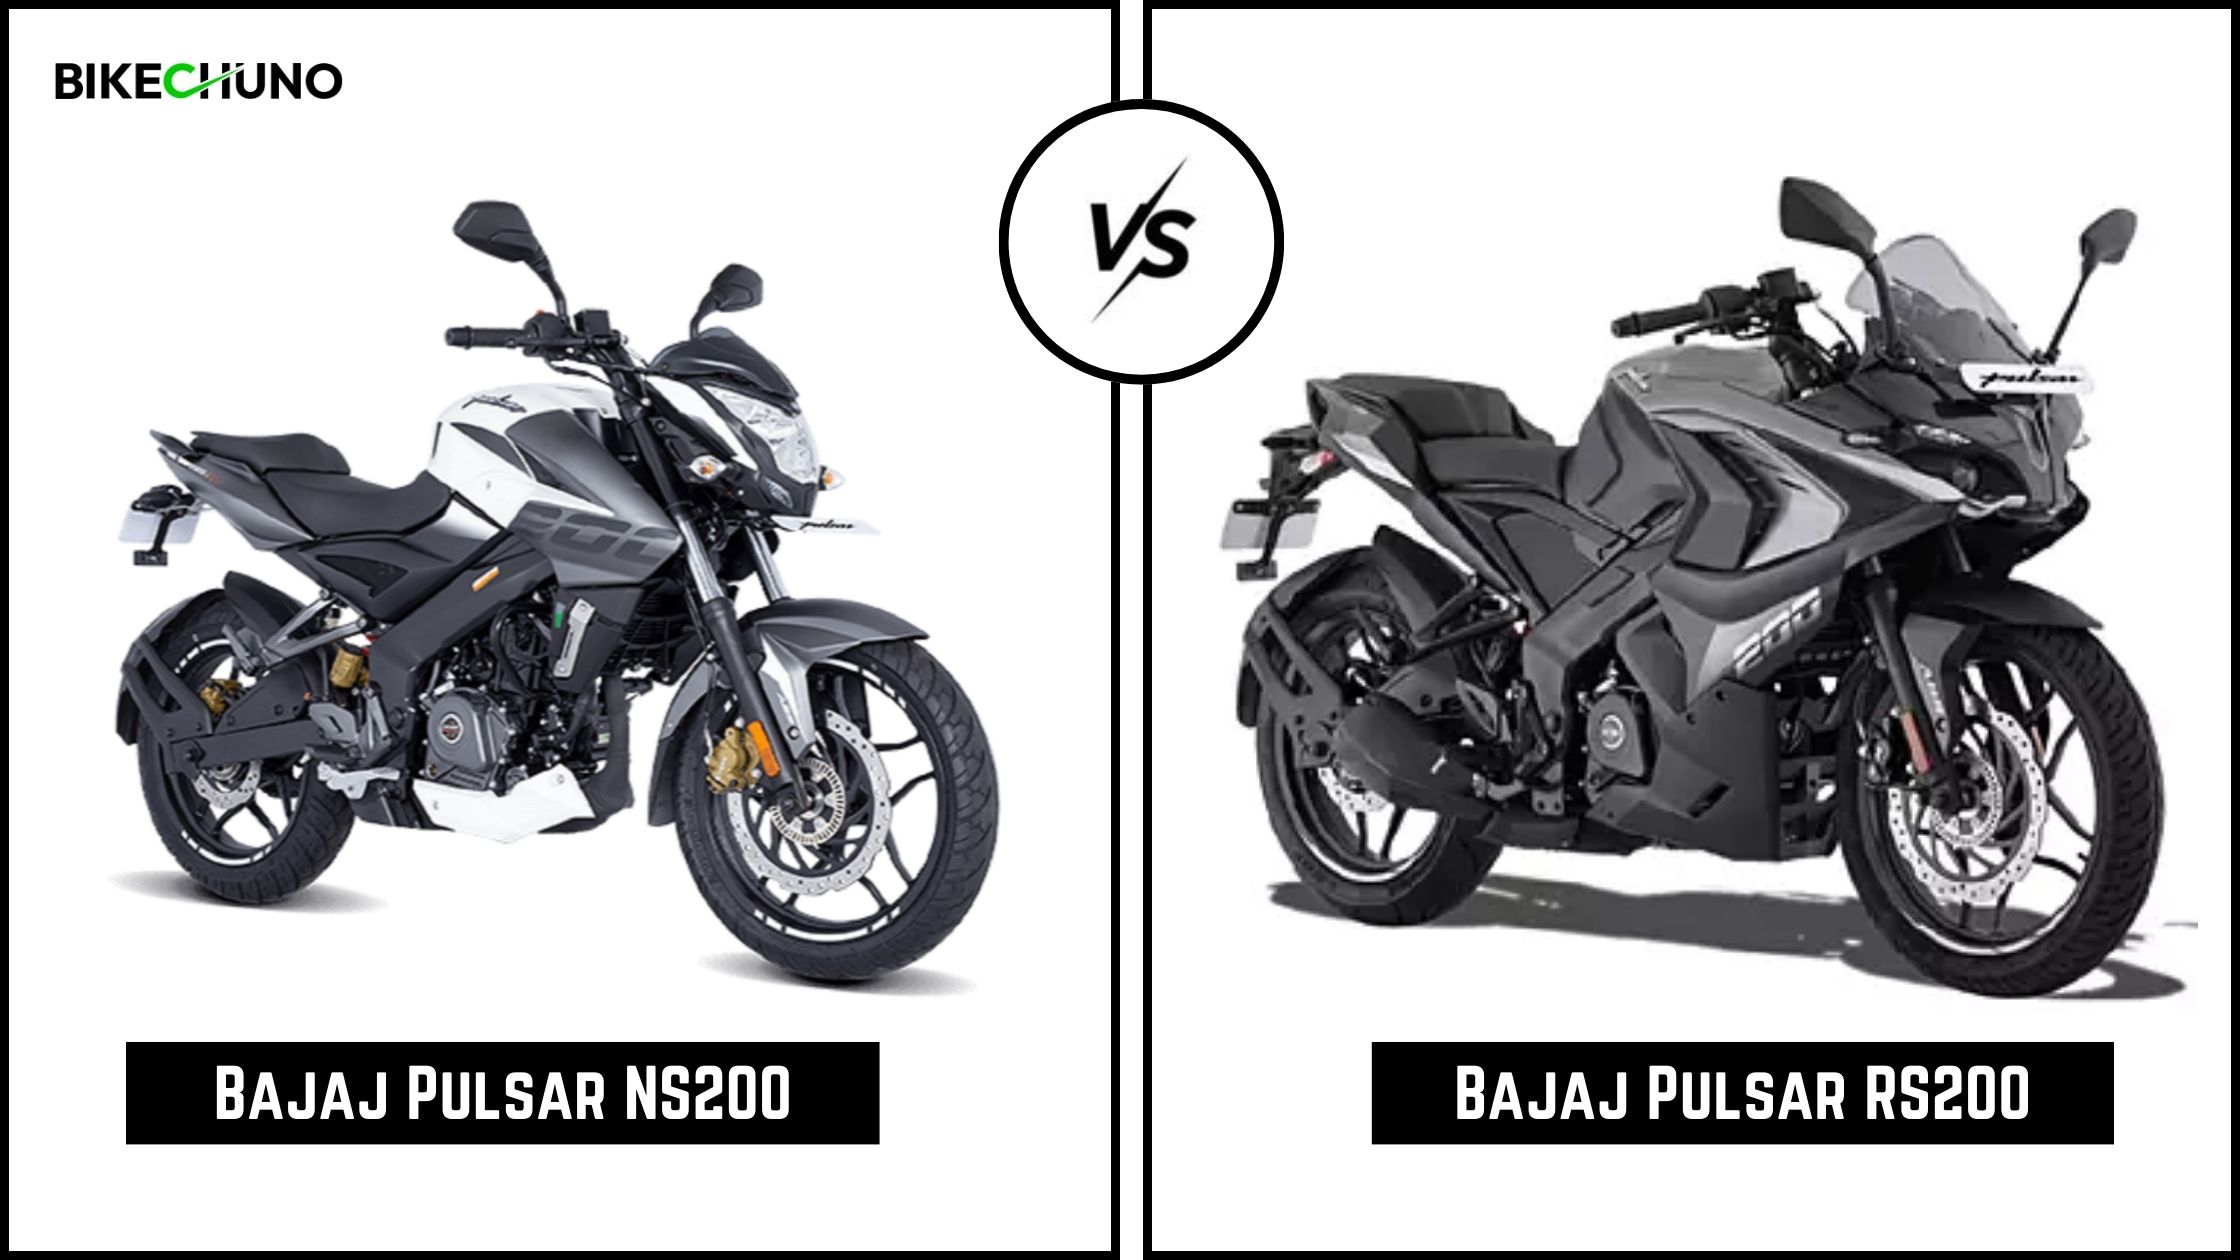 Bajaj Pulsar NS200 compete with the Pulsar RS 200